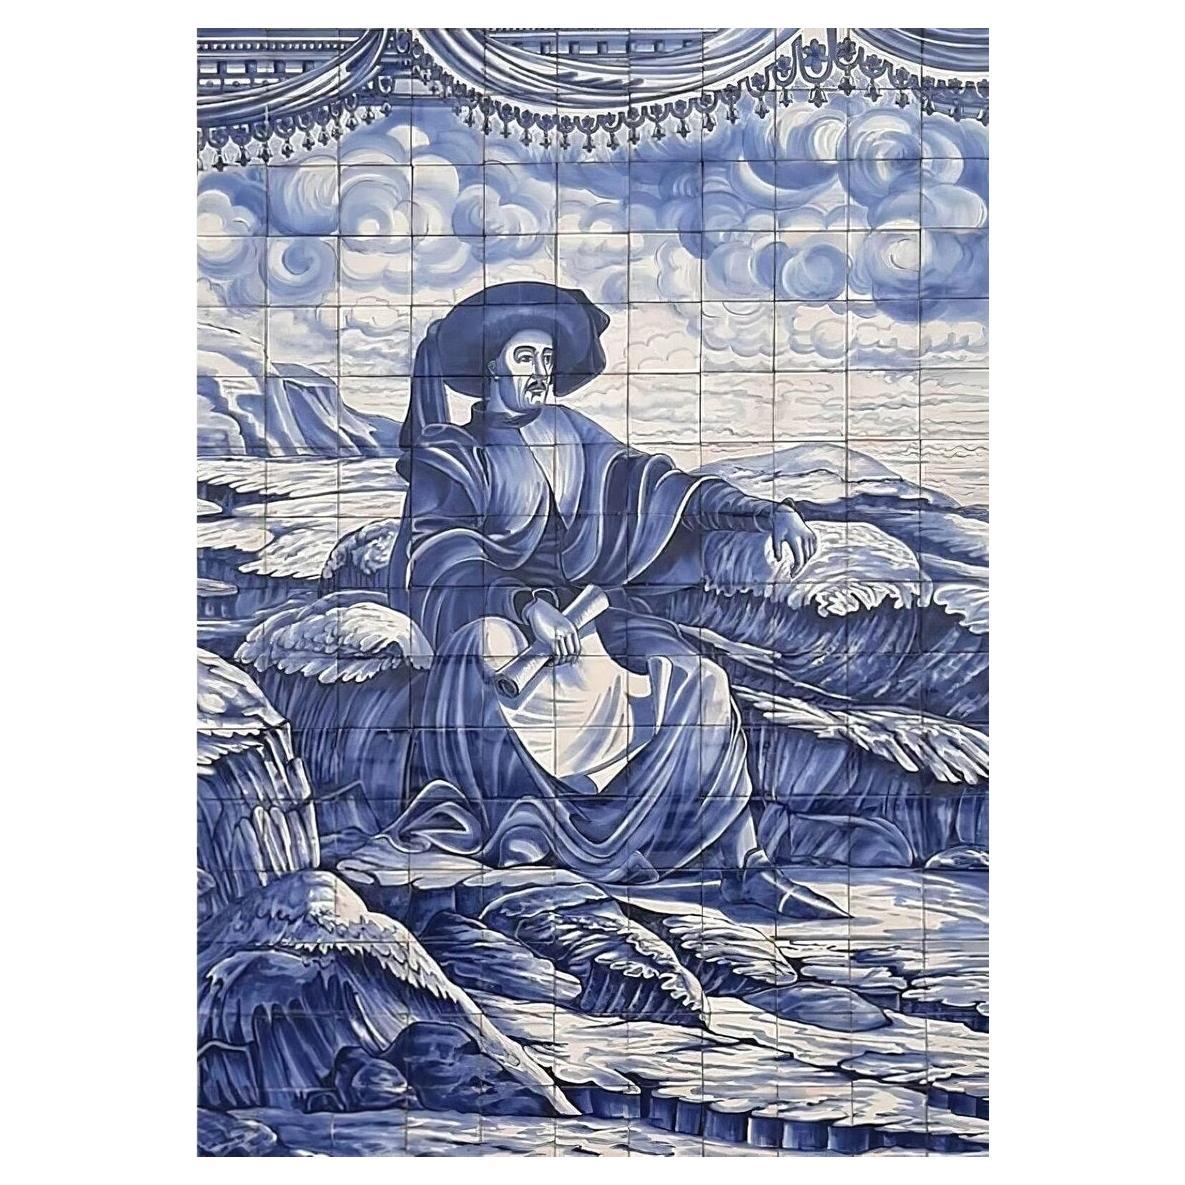 Portuguese Hand Painted Tile Mural "Henry the Navigator" Signed by Artist